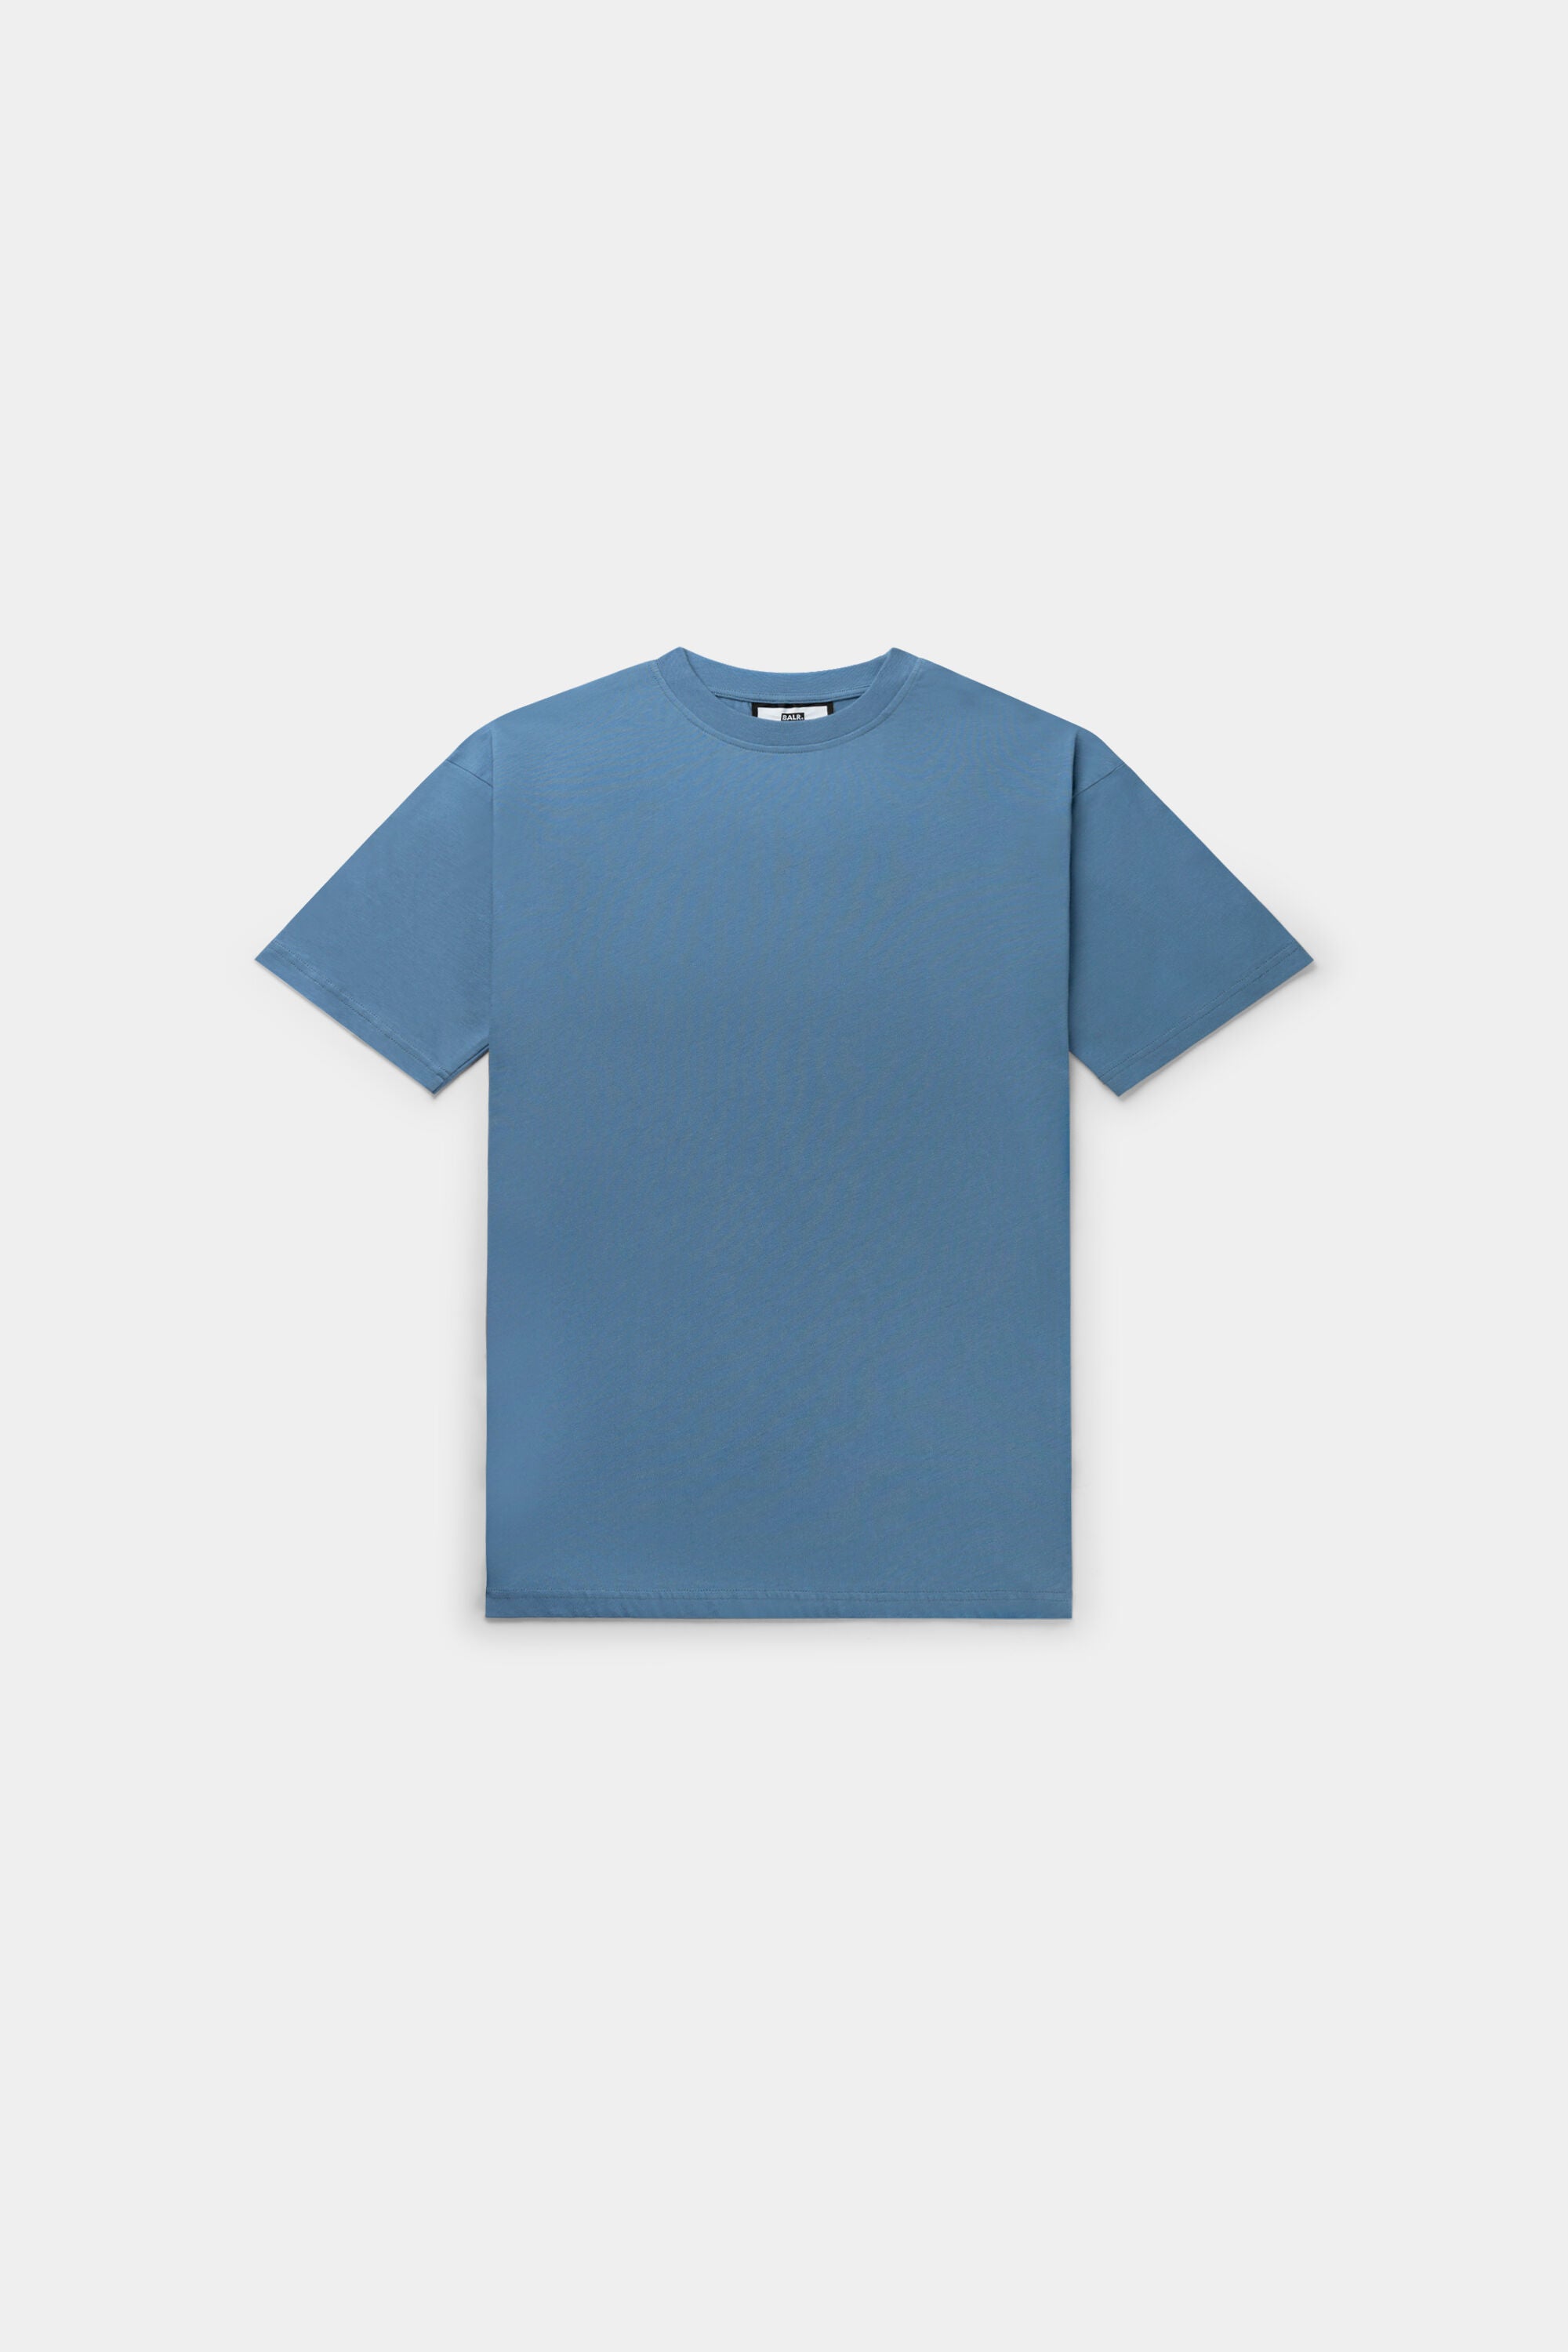 Game Day Box Fit T-Shirt Coronet Blue